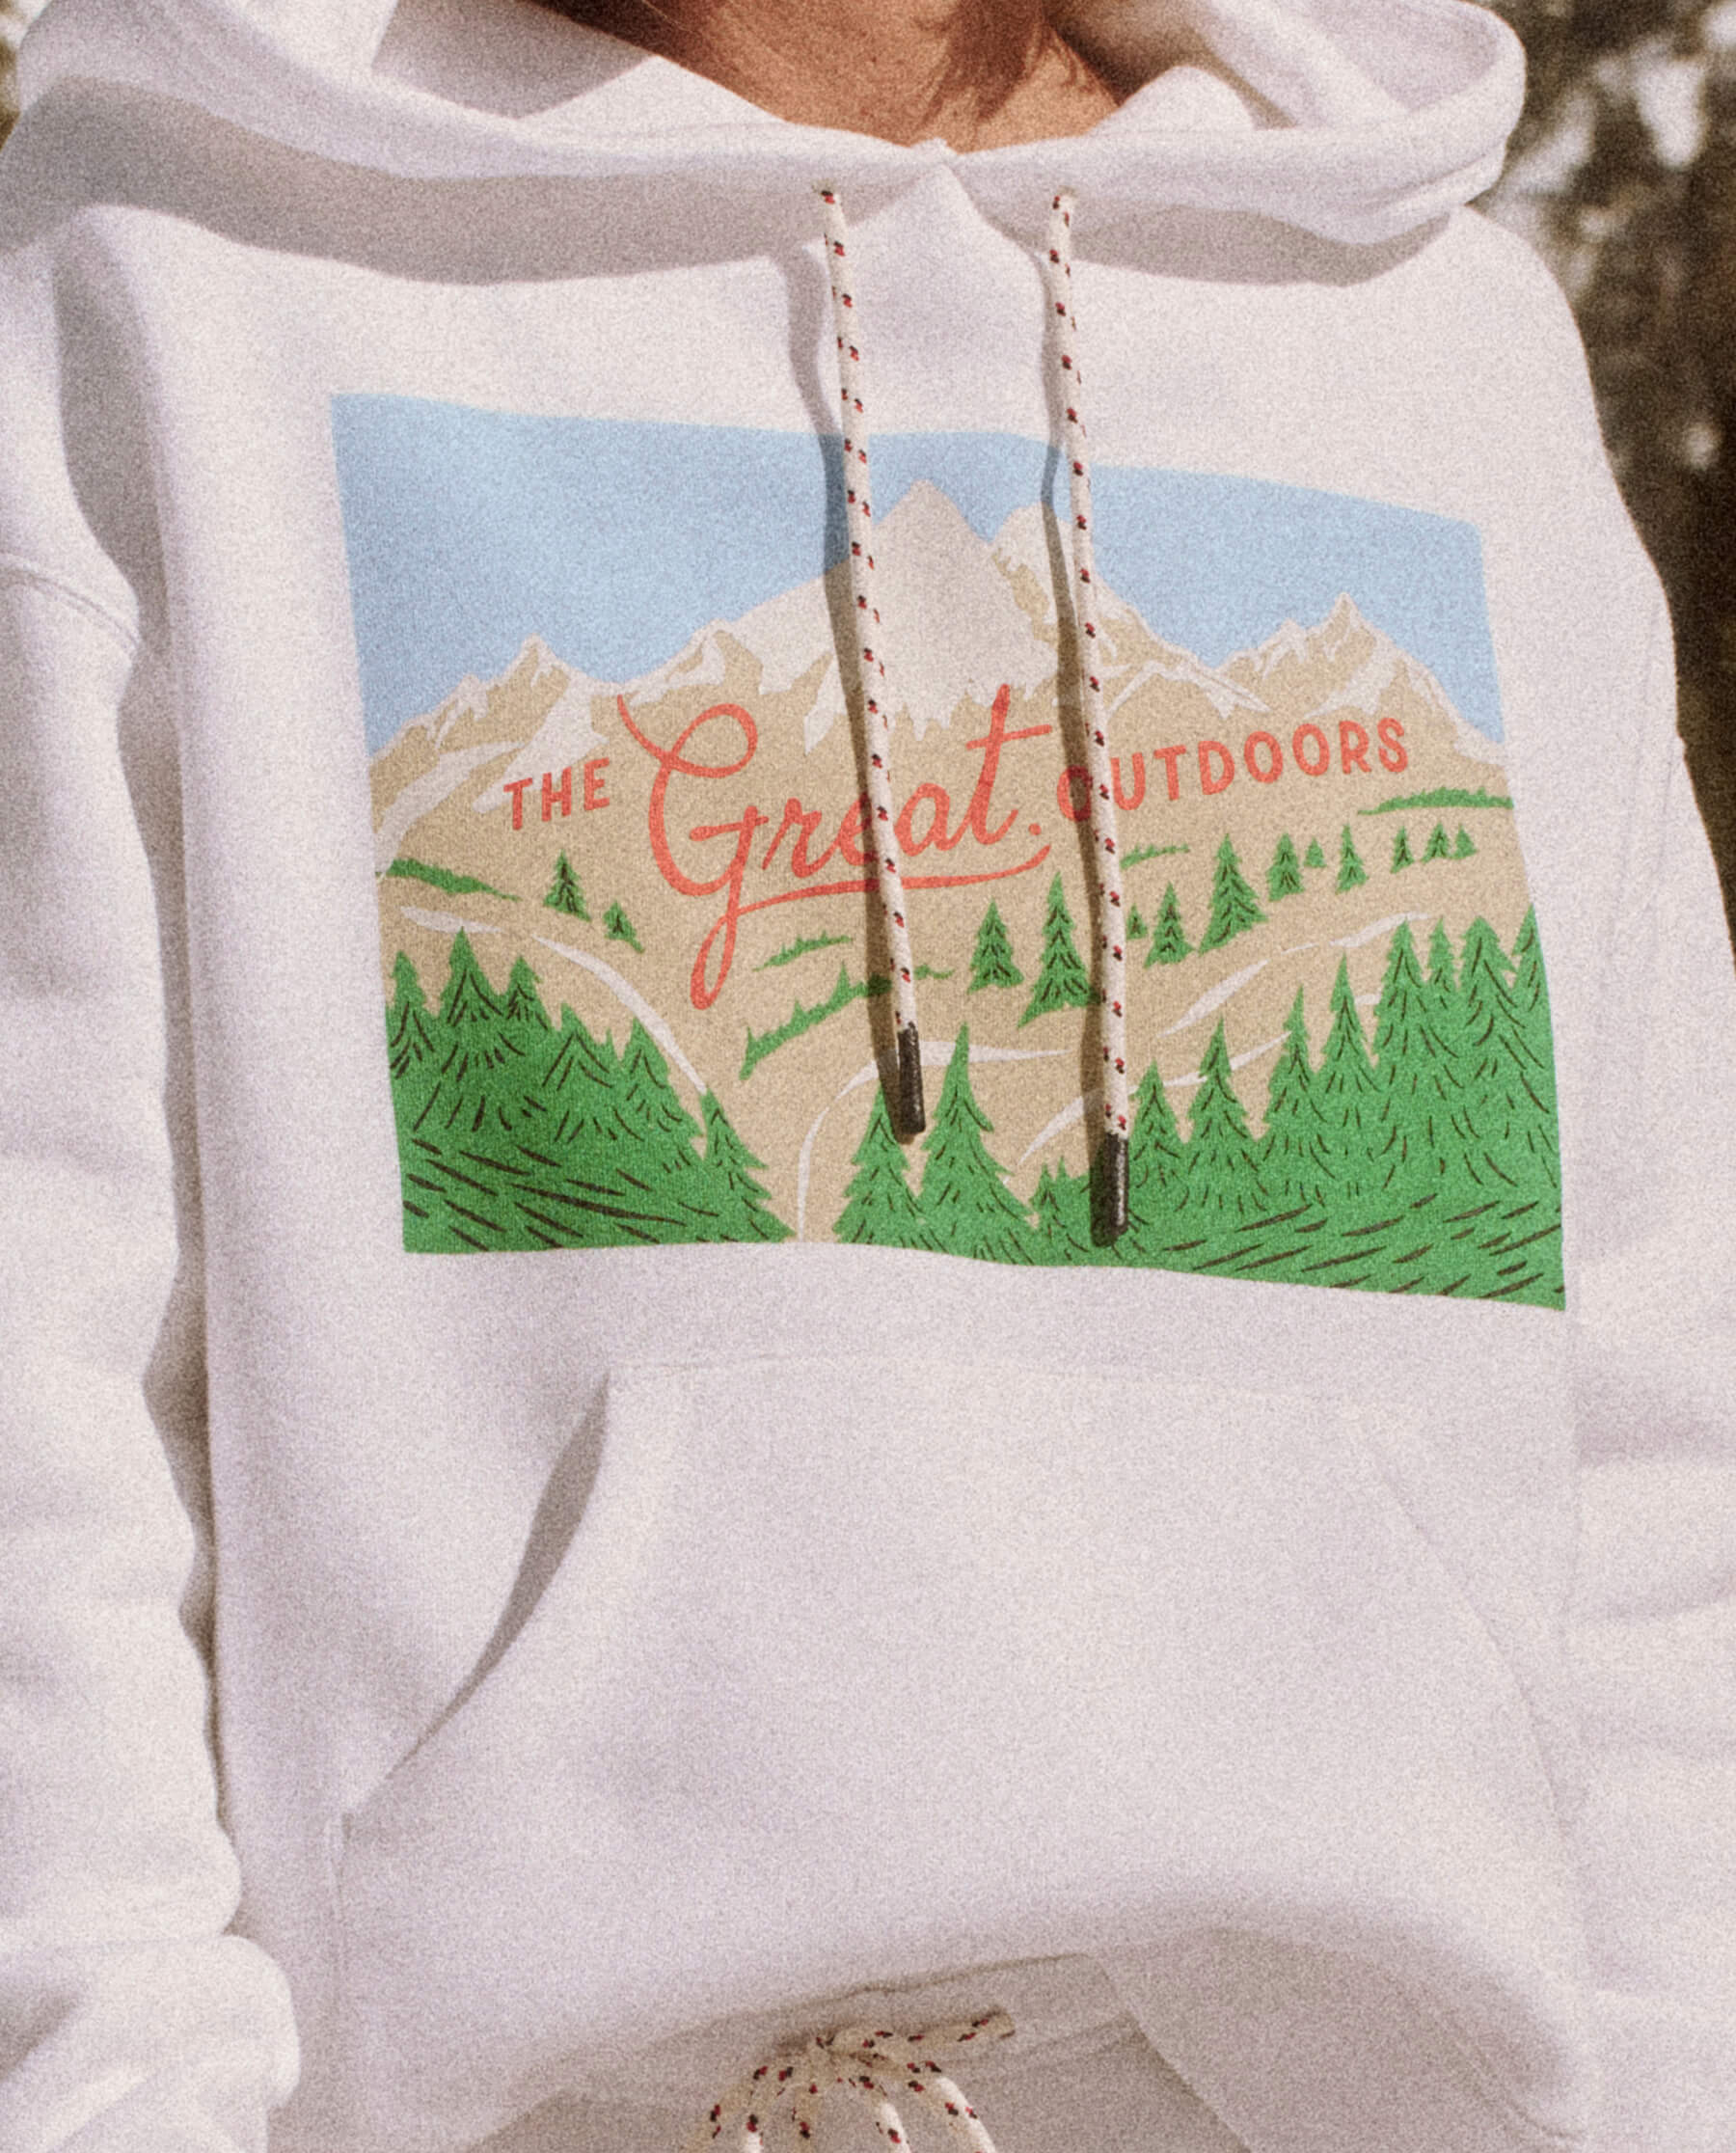 The Pathway Hoodie. -- Chalk SWEATERS THE GREAT. FALL 23 TGO SALE